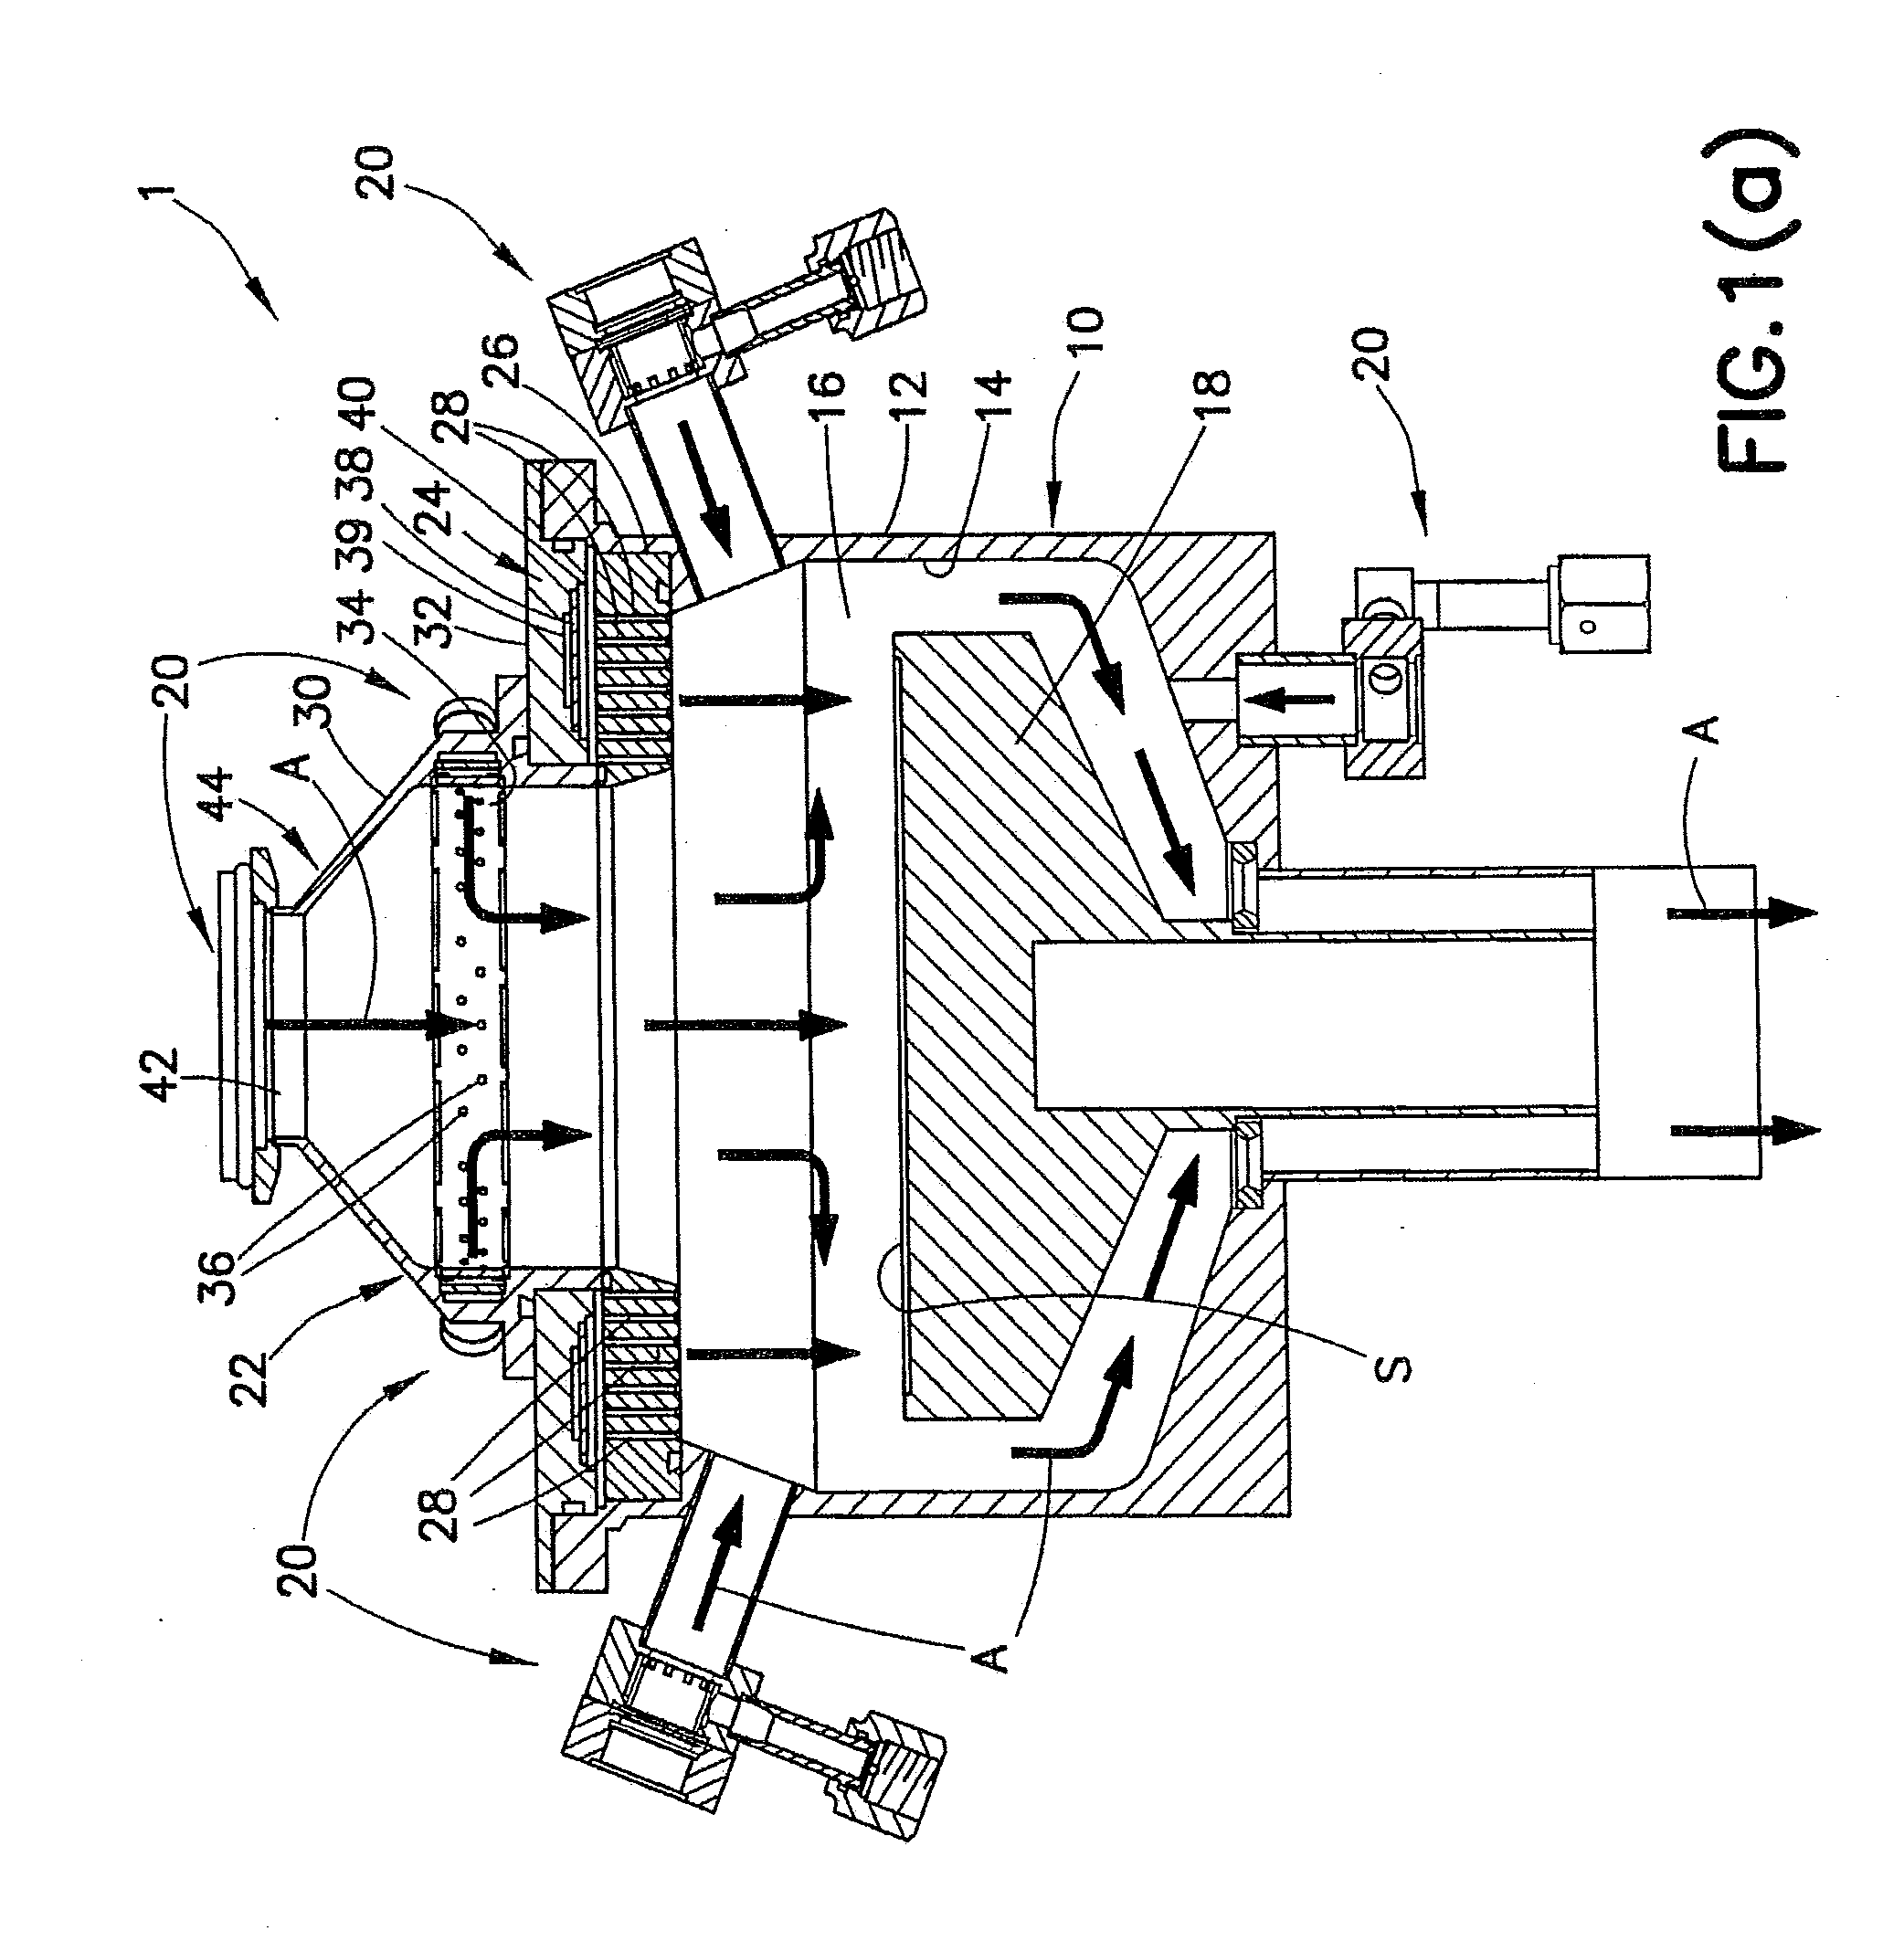 Atomic Layer Deposition Apparatus and Process